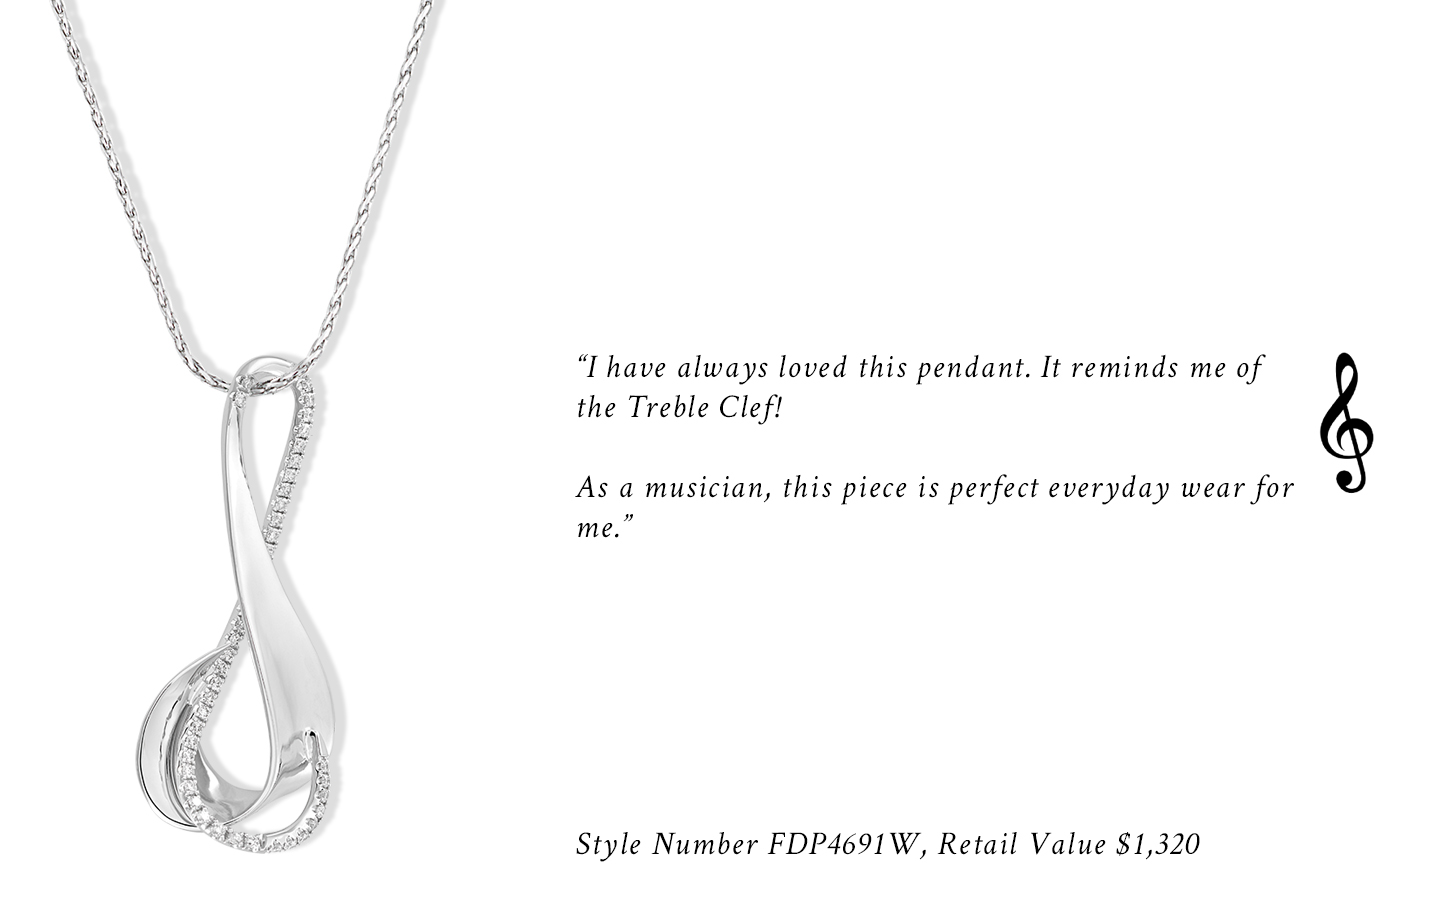 "I have always loved this pendant. It reminds me of the Treble Clef! As a musician, this piece is perfect for everyday wear for me." Style Number FDP4691W, Retail Value $1,320